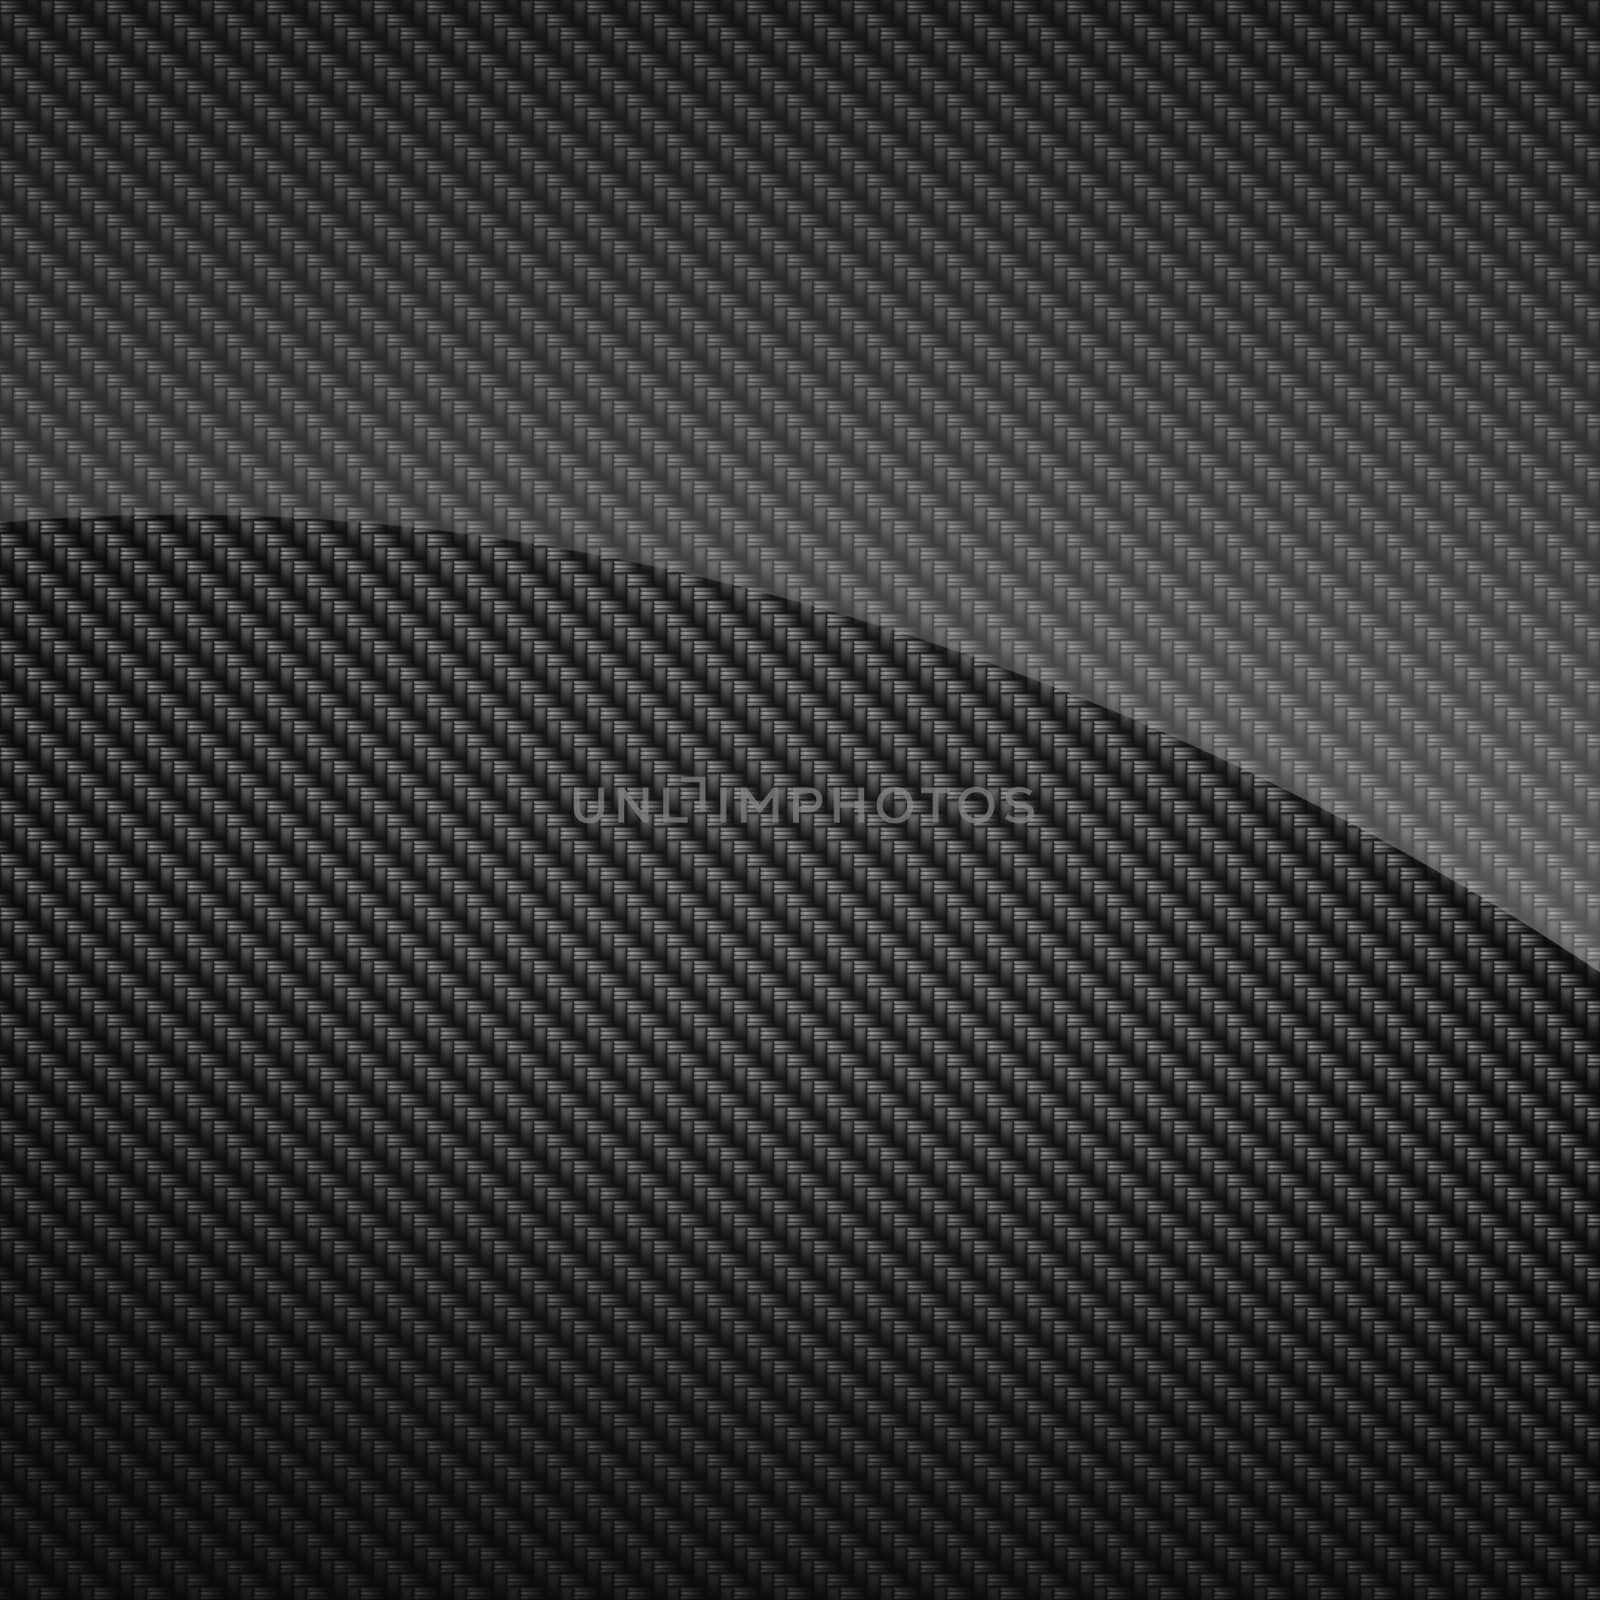 Black glossy carbon fiber background or texture by Attila